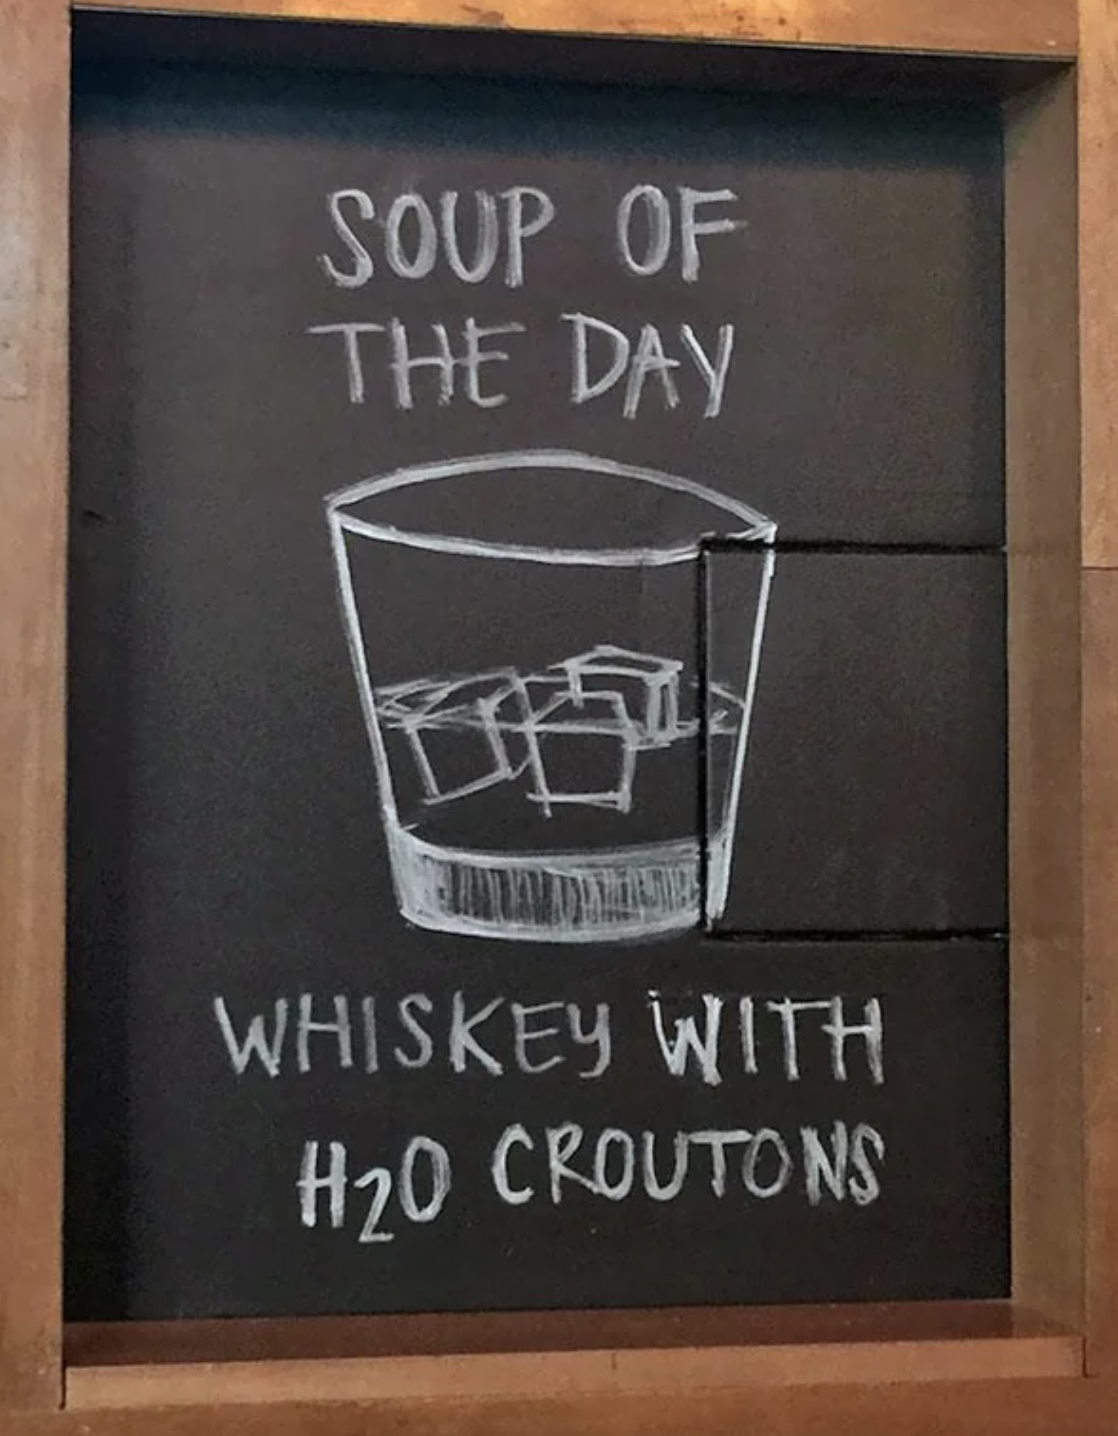 Handwritten restaurant sign: &quot;Soup of the day: Whiskey with H20 croutons&quot; with whiskey glass drawn